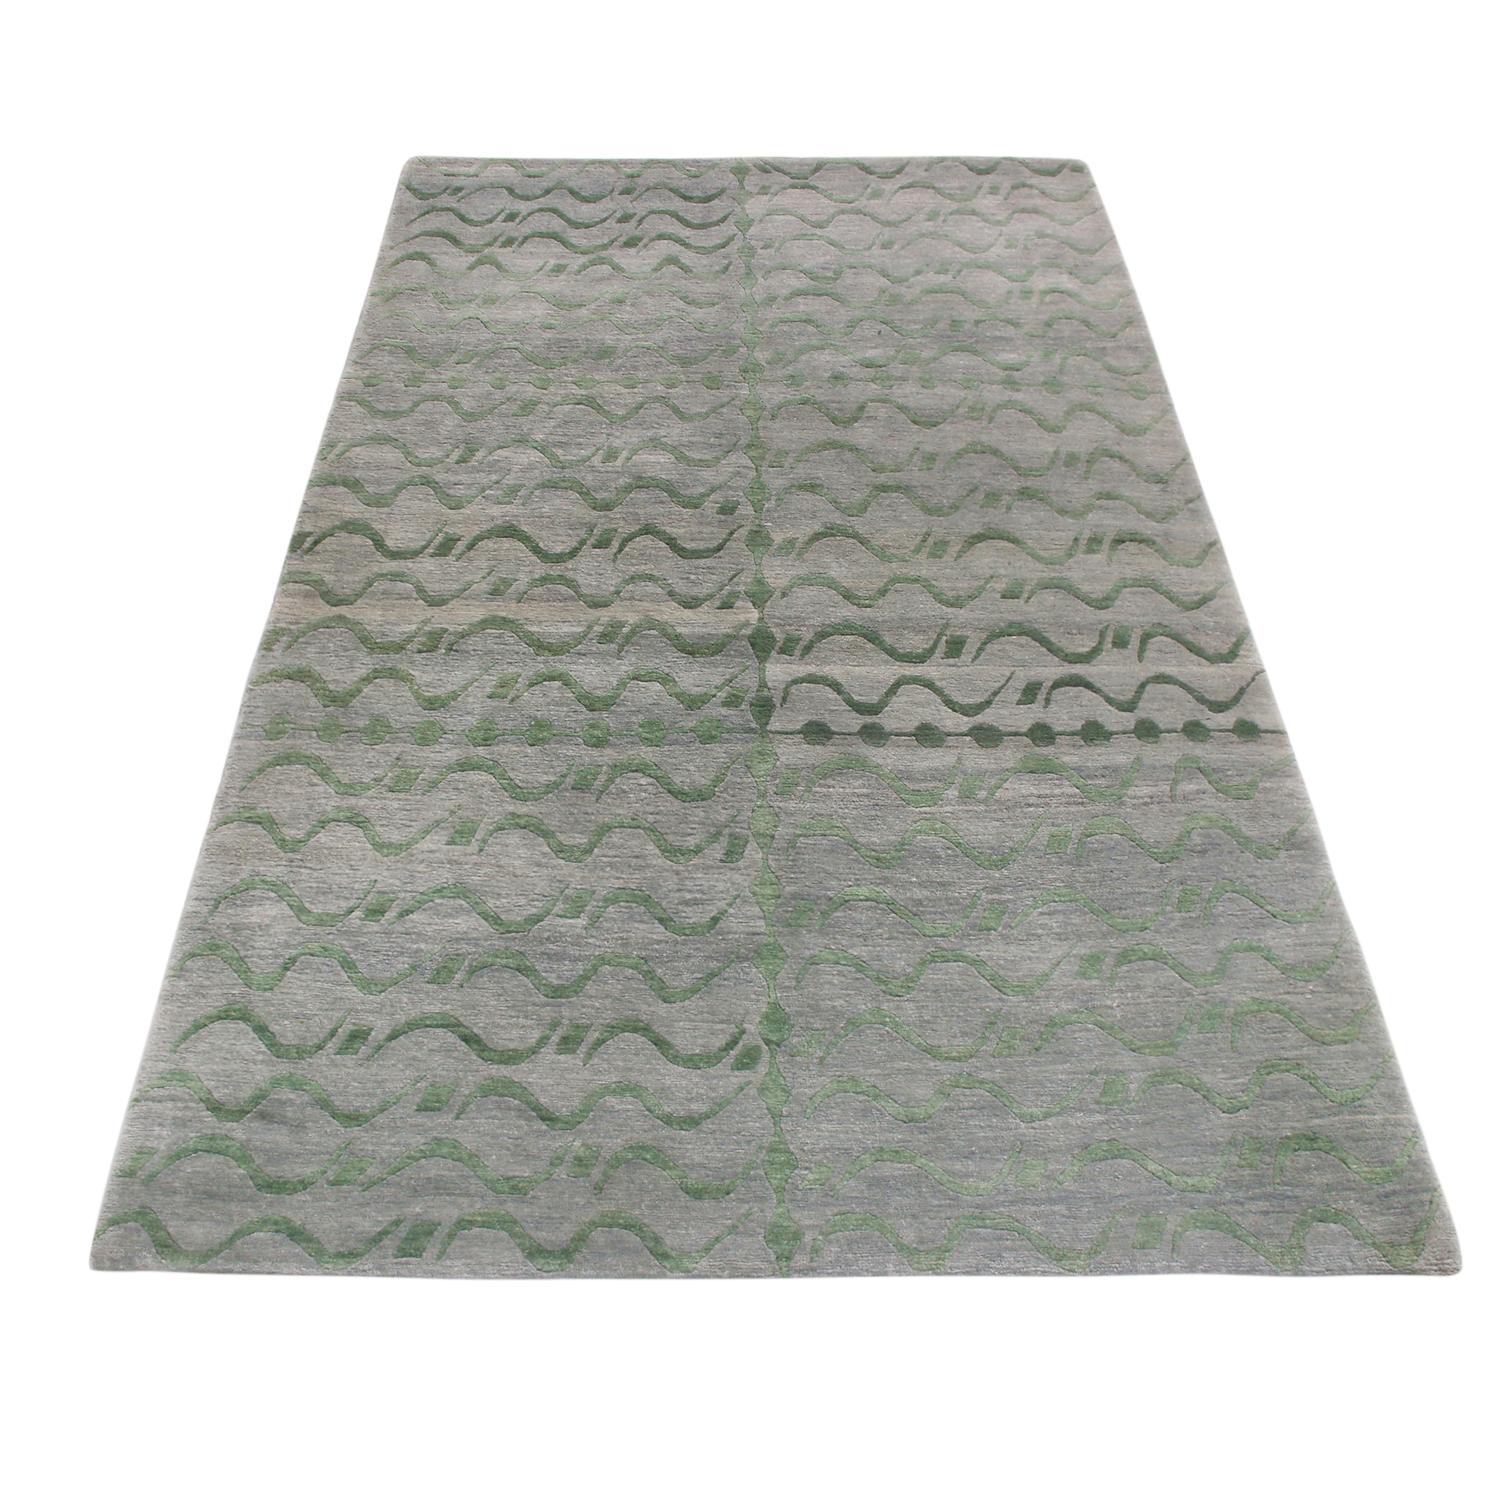 Rug & Kilim’s Youngste design originates from Nepal, hand knotted in high-quality wool with a paneled all-over field design. The particularly luminous, borderless lengths of deep green pair elegantly with the more industrial, abrashed silver-gray